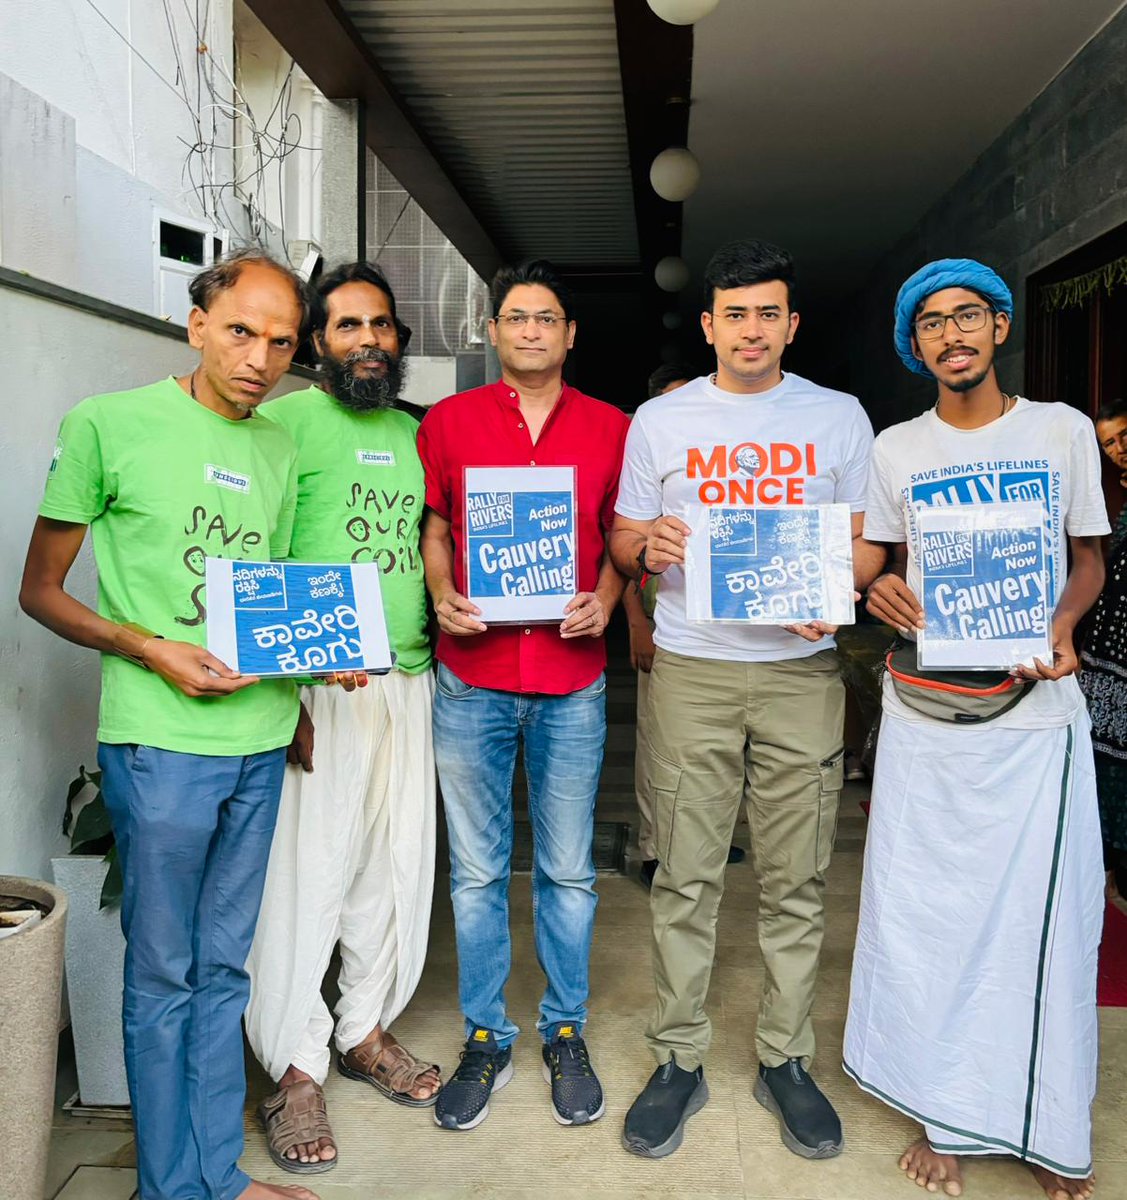 We met today @Tejasvi_Surya and he supported whole heartedly #CauveryCalling campaign doing by Yashas. Yashas is on bare foot yatra from Thala Cauvery to Sea shore Poomphur to spread awareness about Cauvery Calling project to rejuvenate our Mother river #SaveSoil